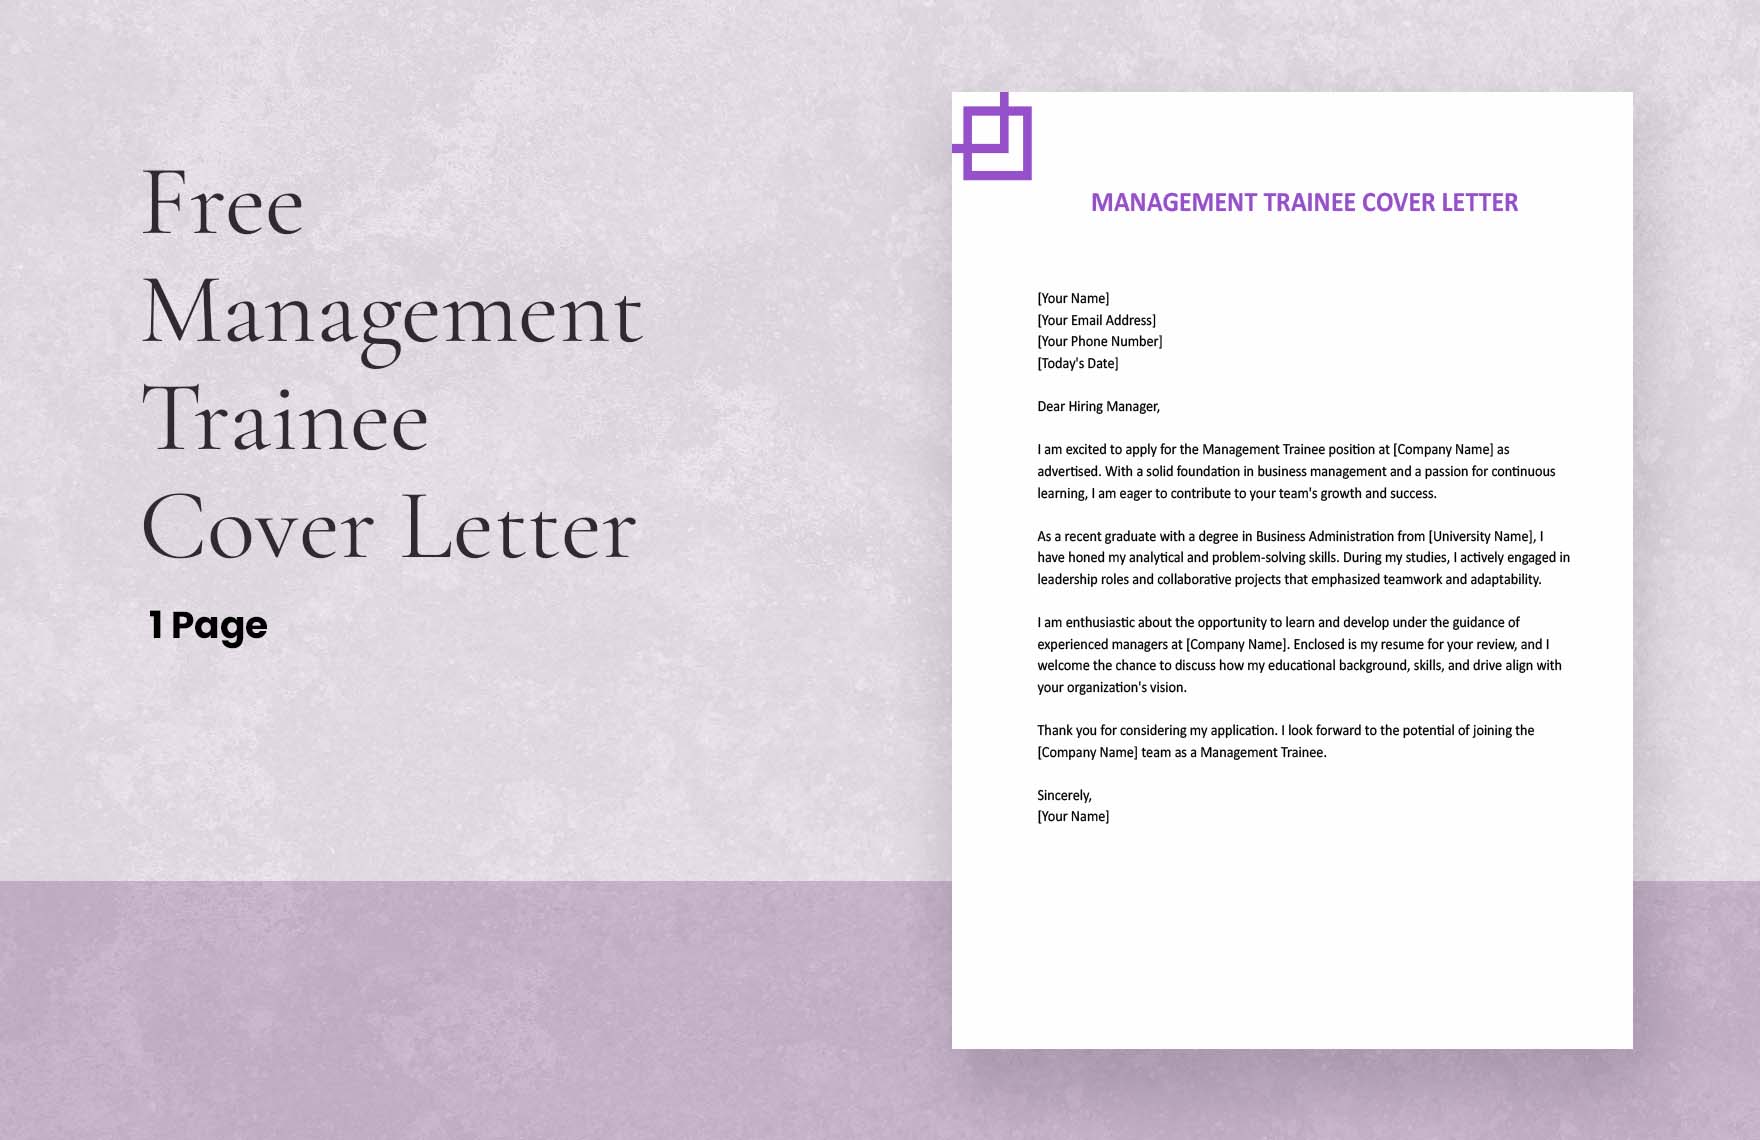 Management Trainee Cover Letter in Word, Google Docs